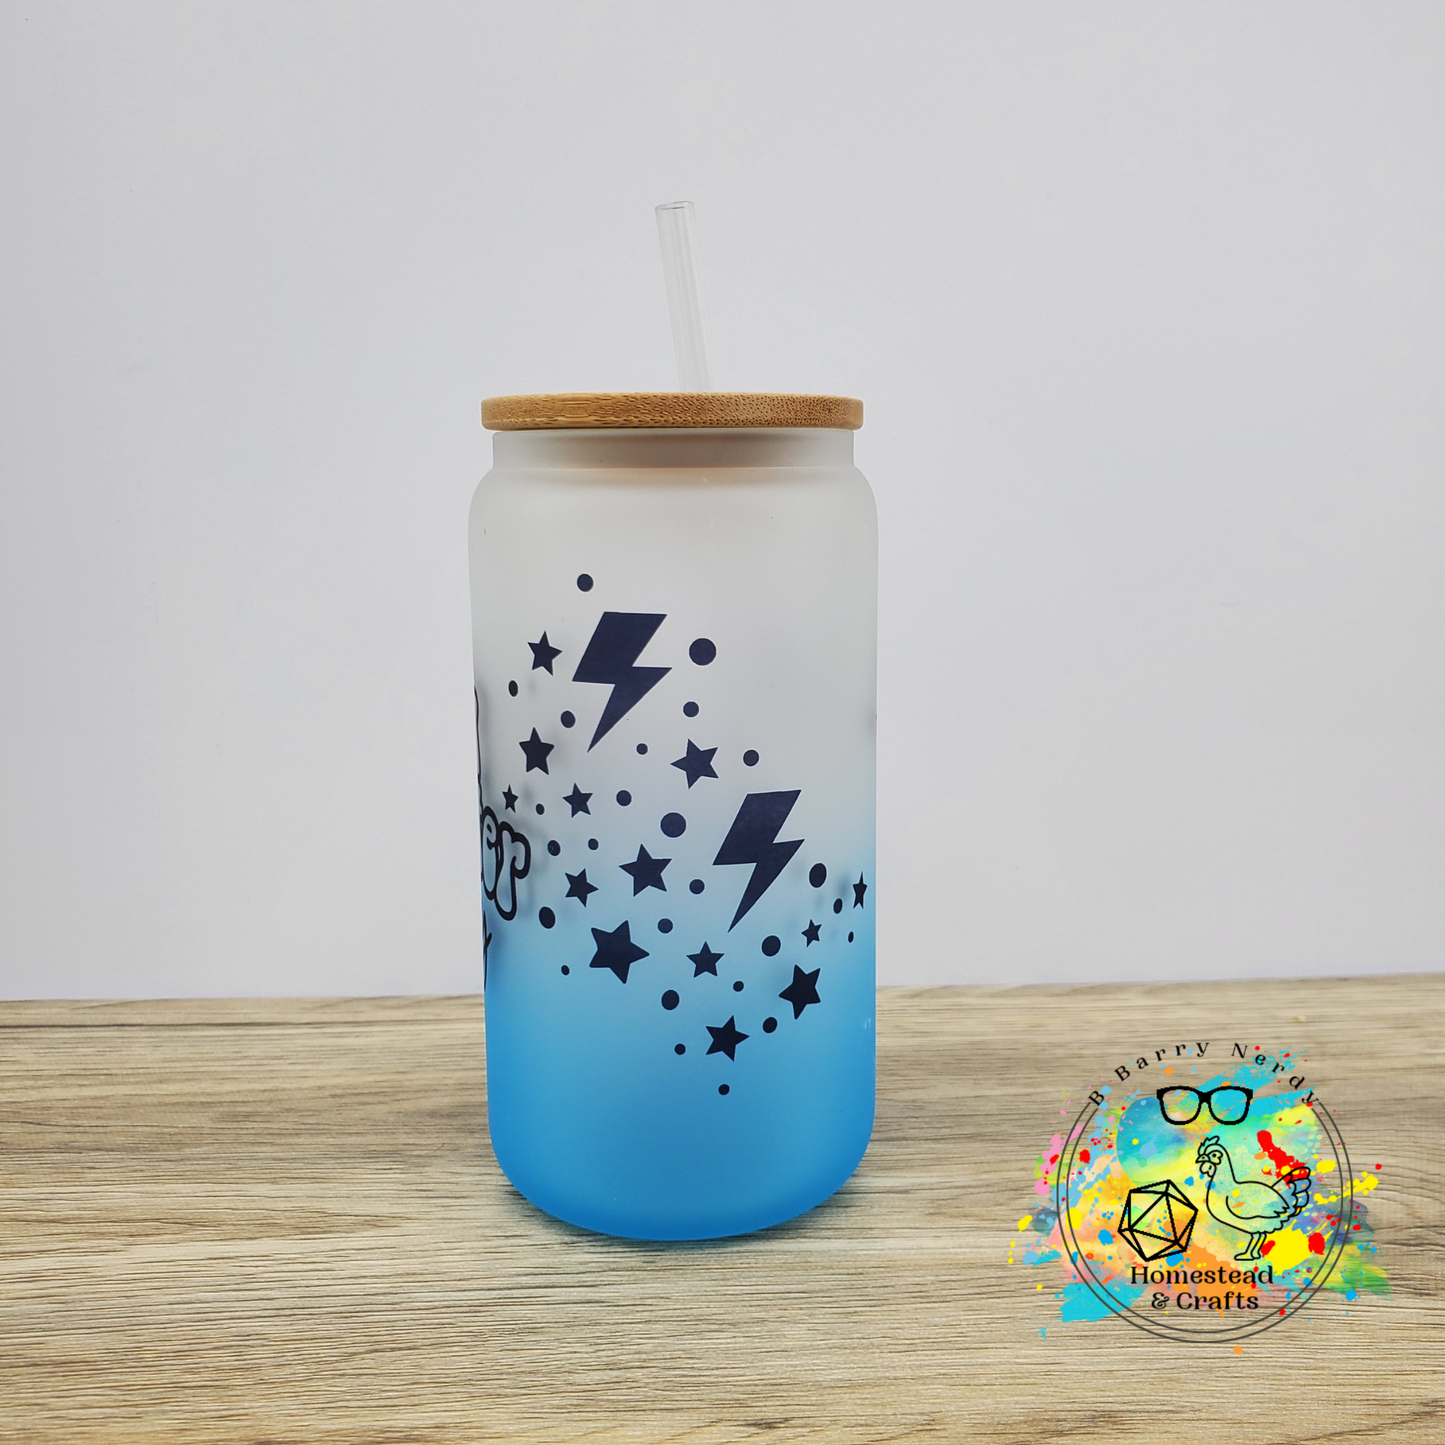 Main Character Energy, 16oz Sublimated Glass Can